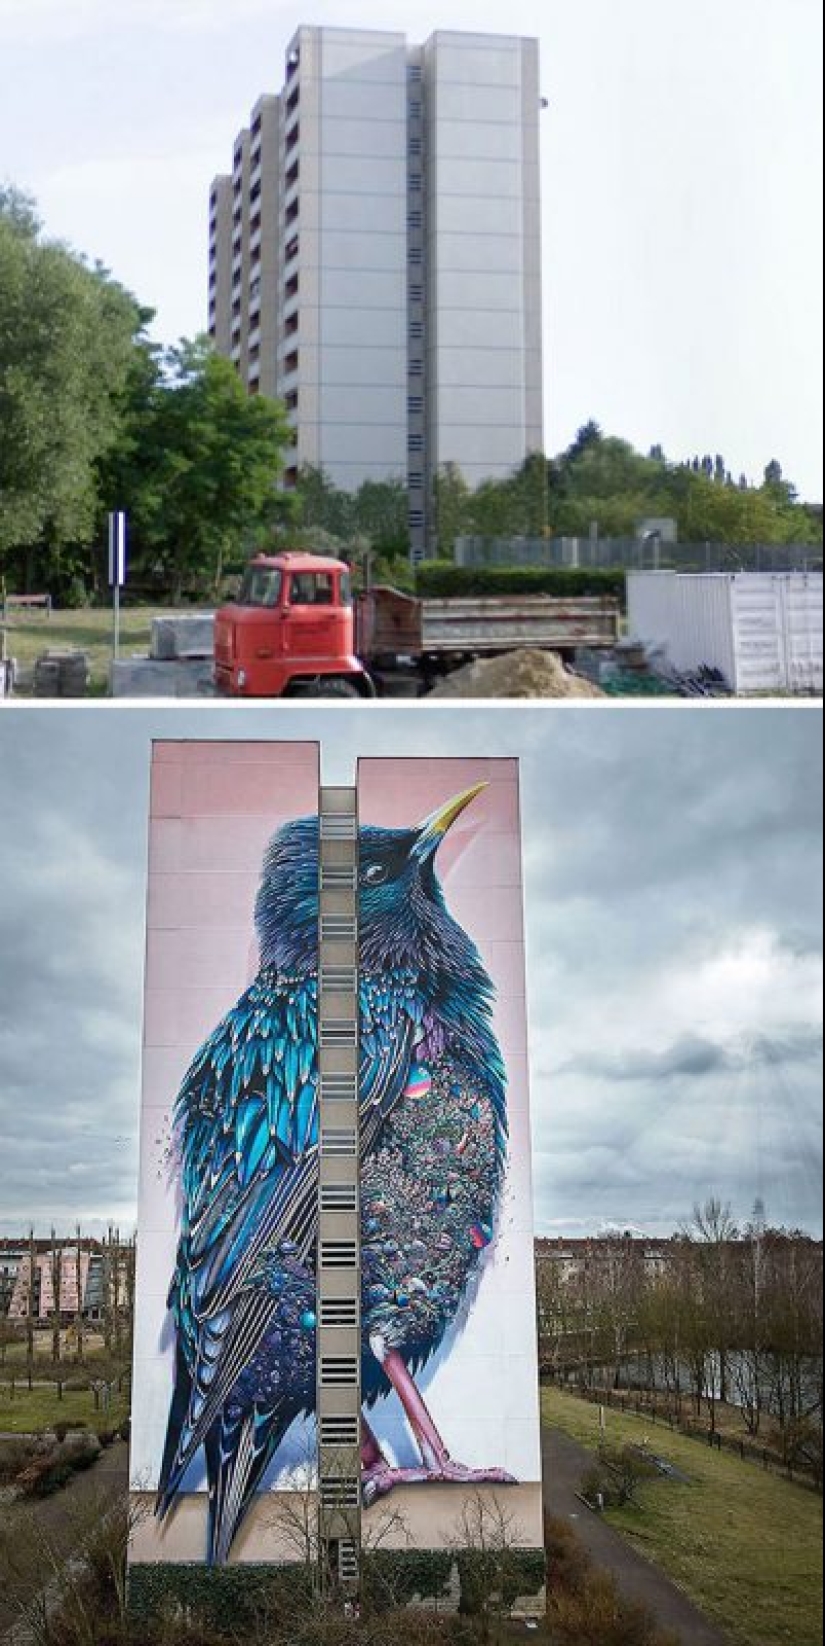 Paint the world in bright colors: the miraculous transformation of the gray buildings into works of art through graffiti